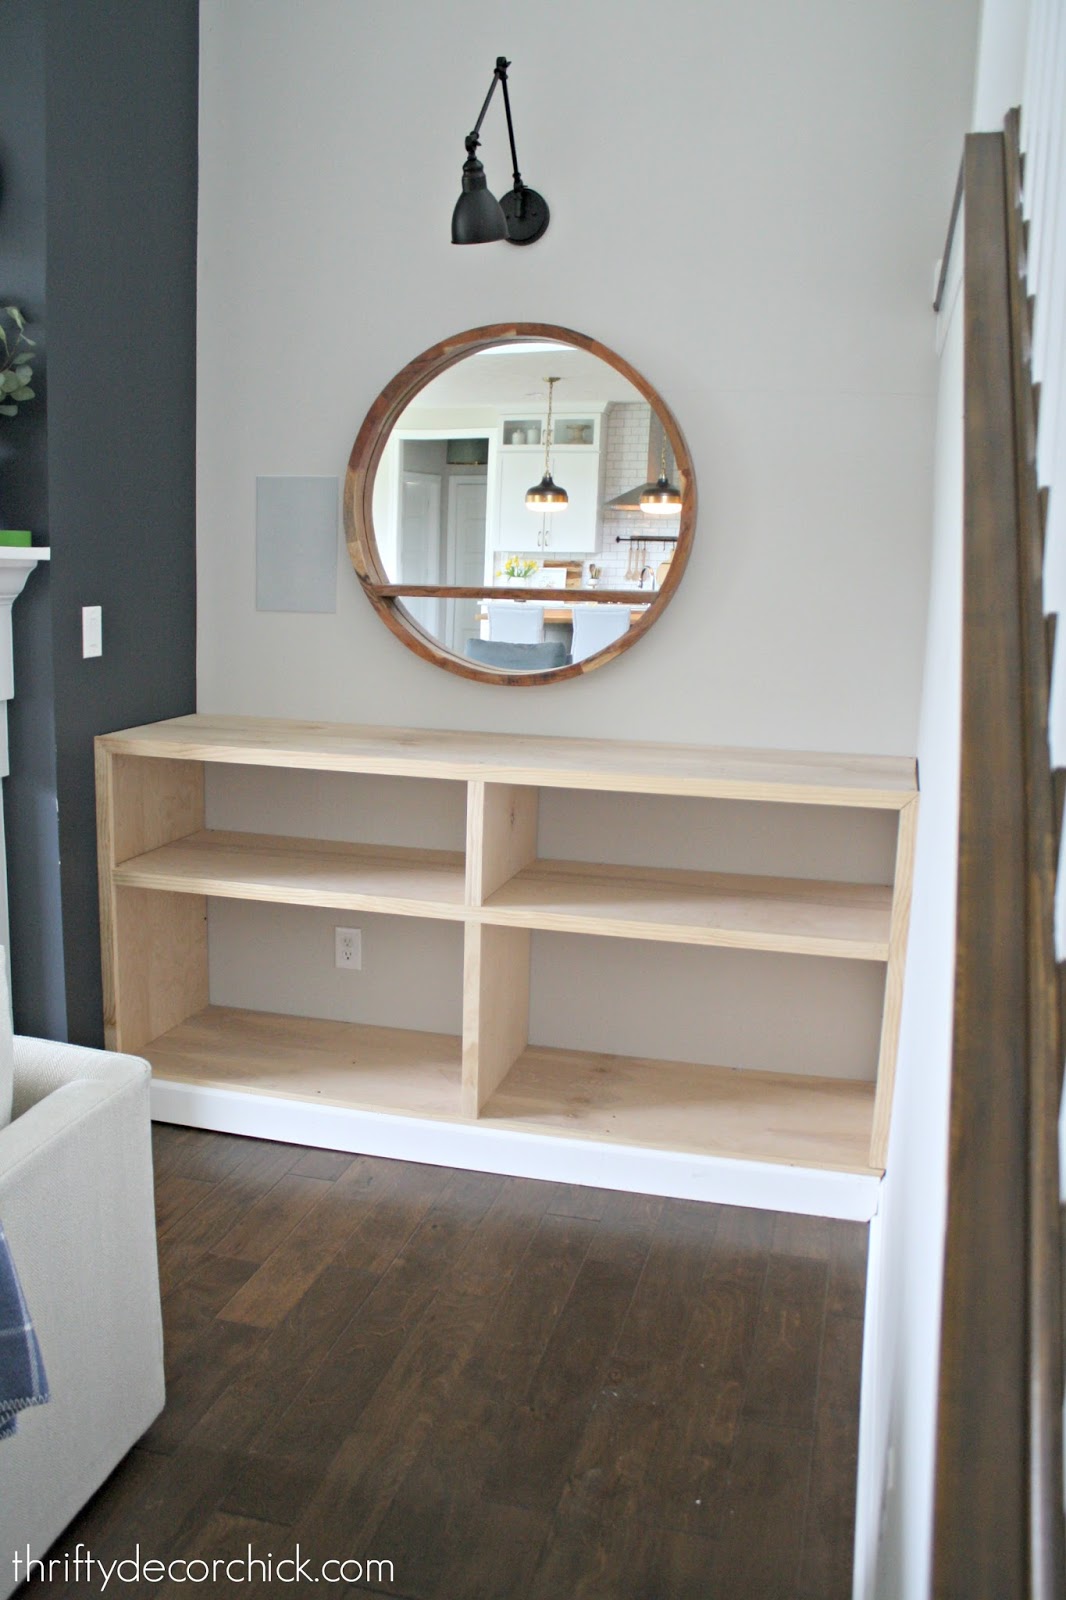 Diy Bookcases By The Fireplace, How To Build Built In Shelves Around Fireplace